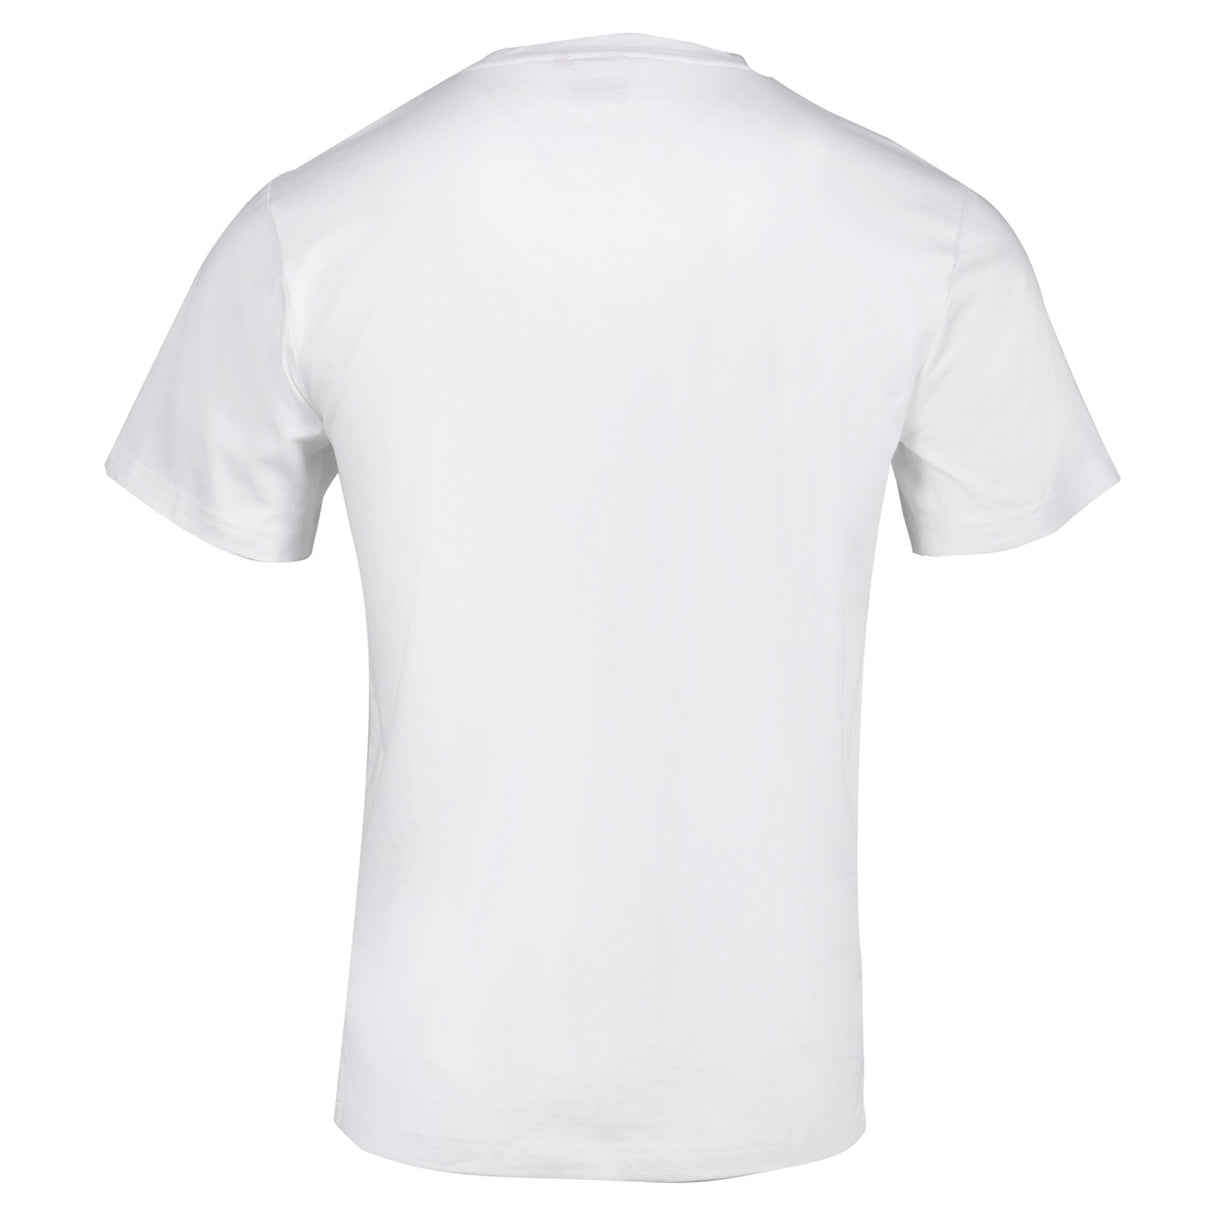 Jouer T-Shirt - White |T-Shirt | Rugby World Cup Collection | Absolute Rugby